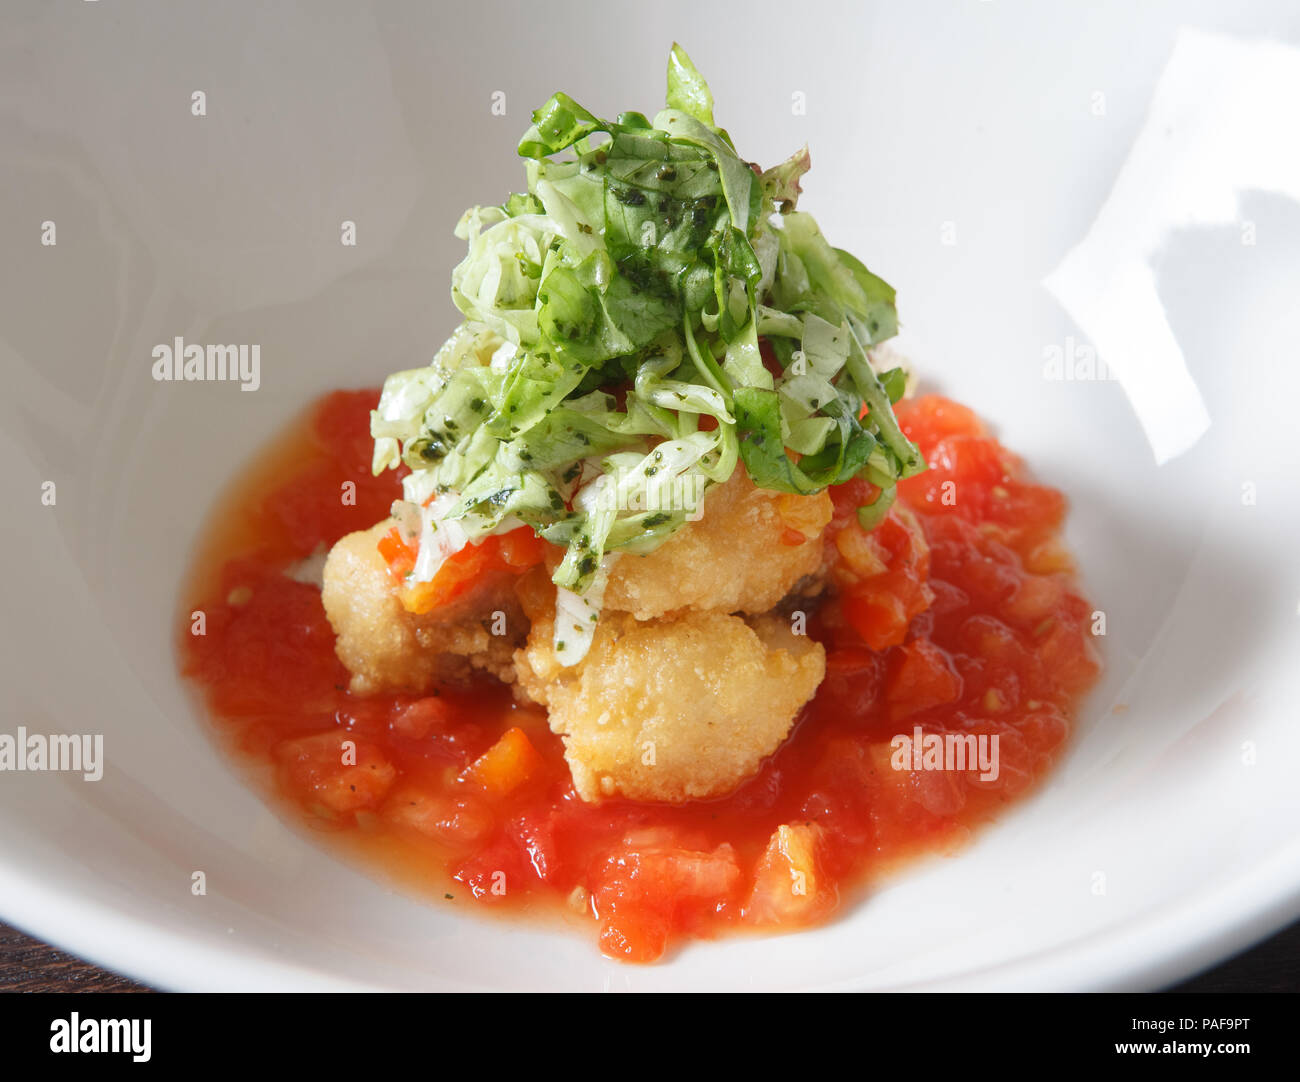 Fried chicken in breadcrumbs with tomato sauce. Stock Photo